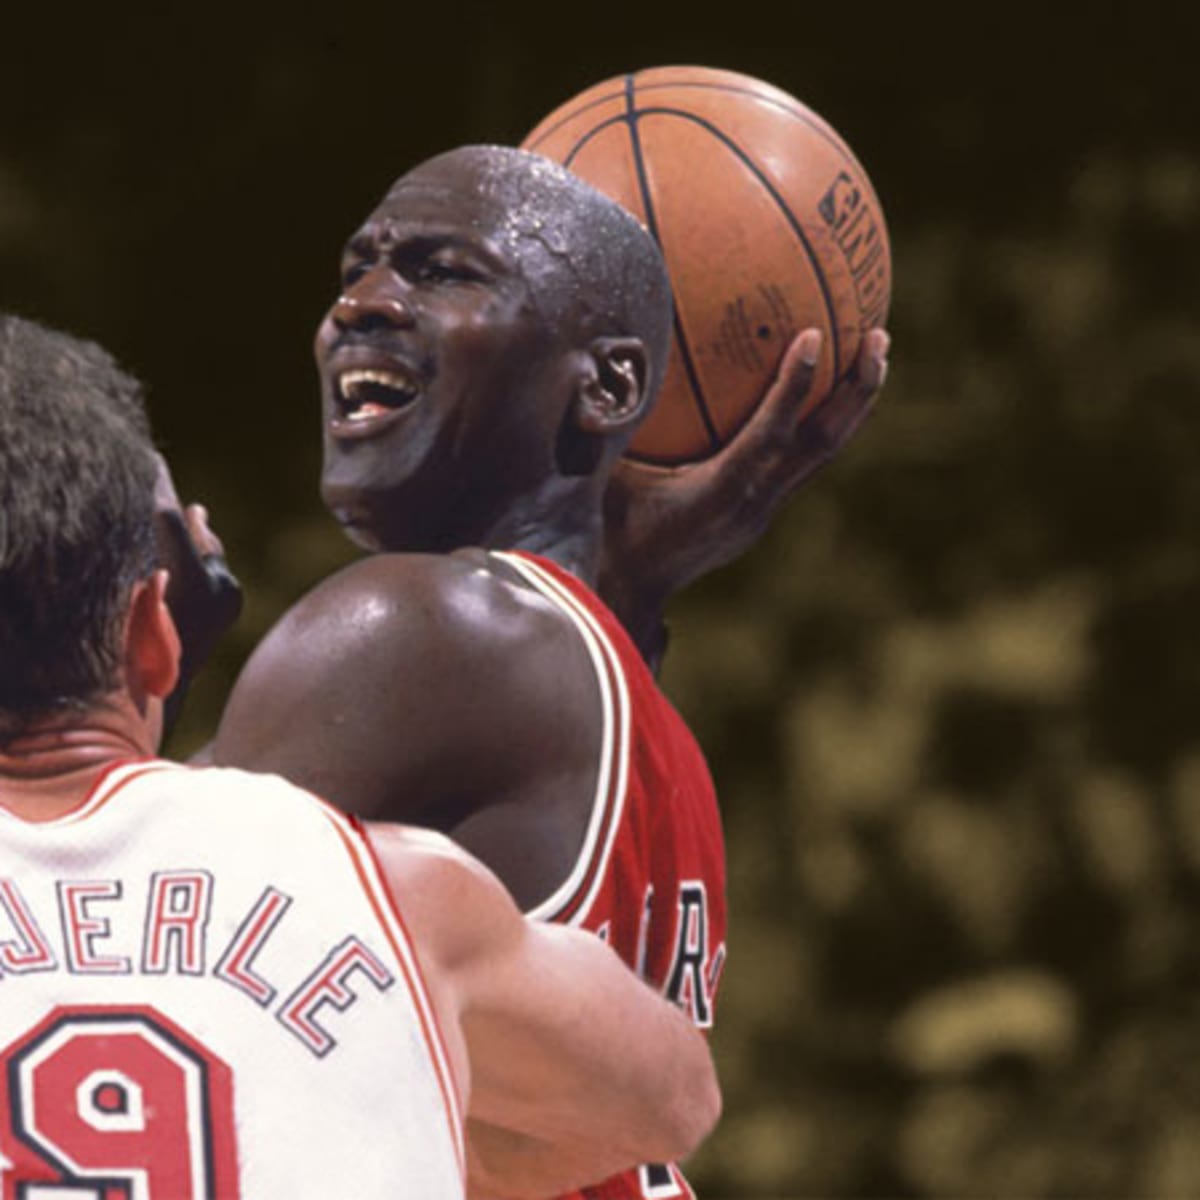 The brilliant disappointment of Michael Jordan's first game